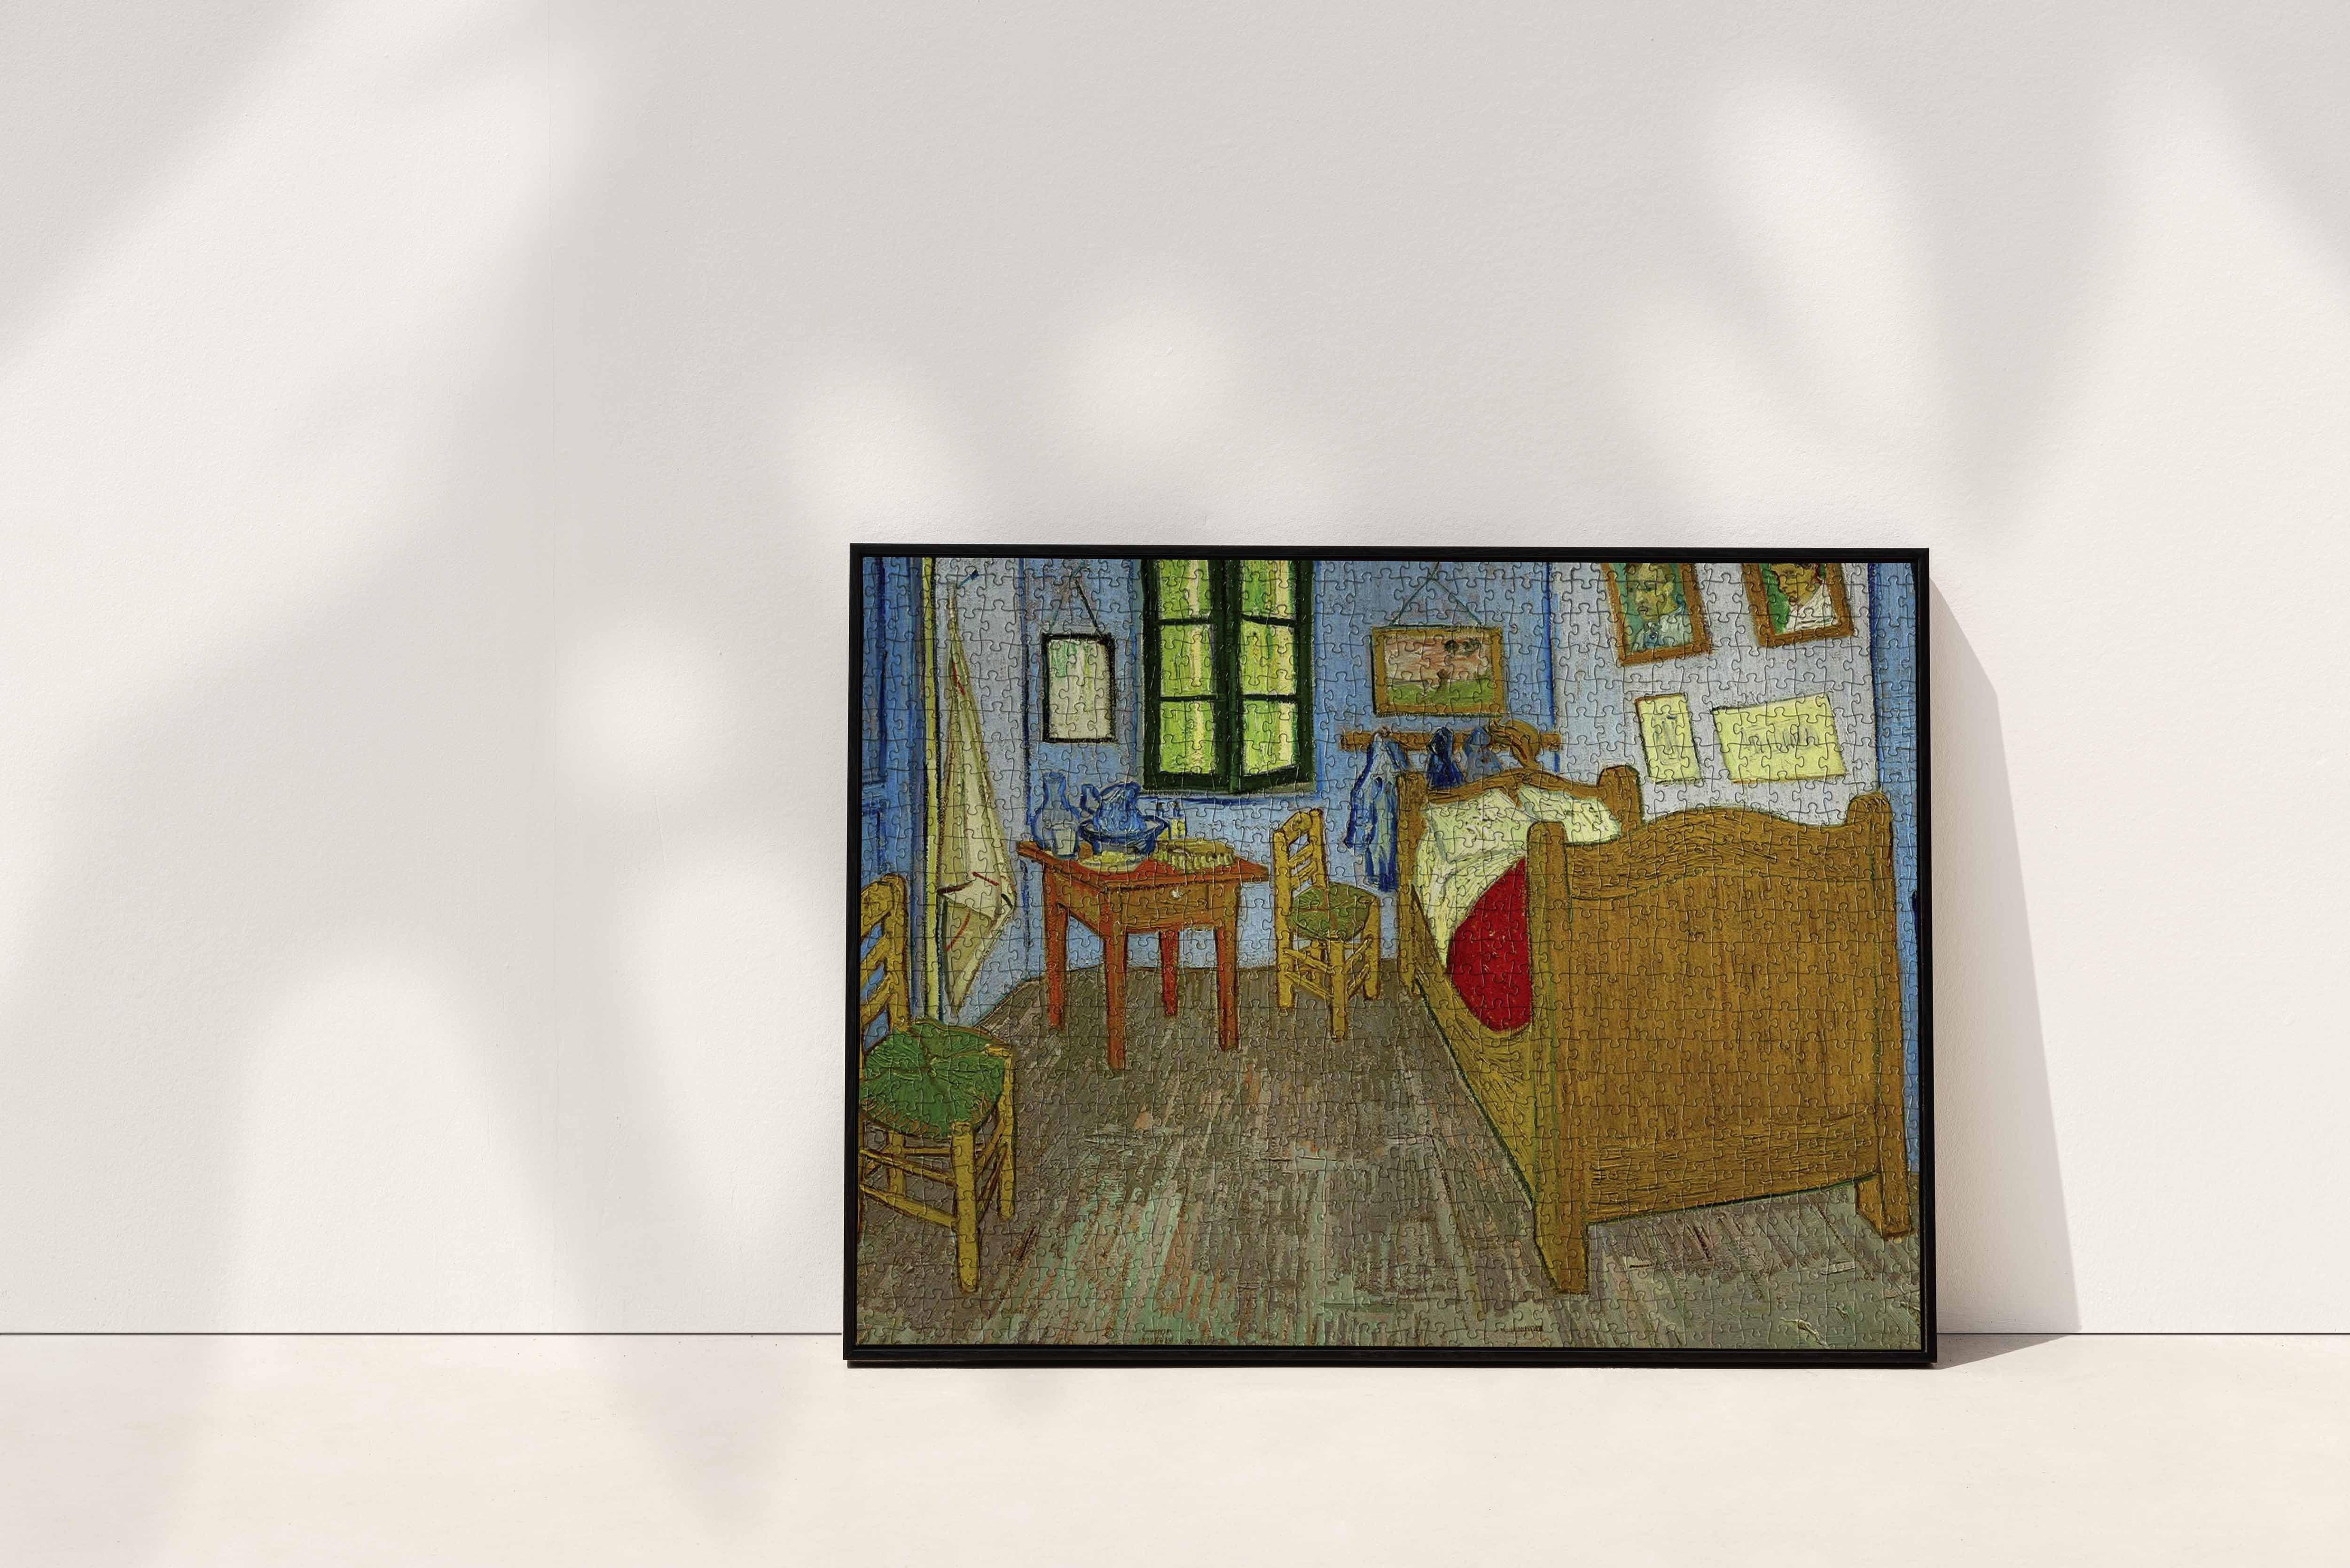 A framed jigsaw puzzle of Van Gogh's Bedroom In Arles, showcasing the artist's iconic depiction of a cosy bedroom with vibrant hues and textured details.